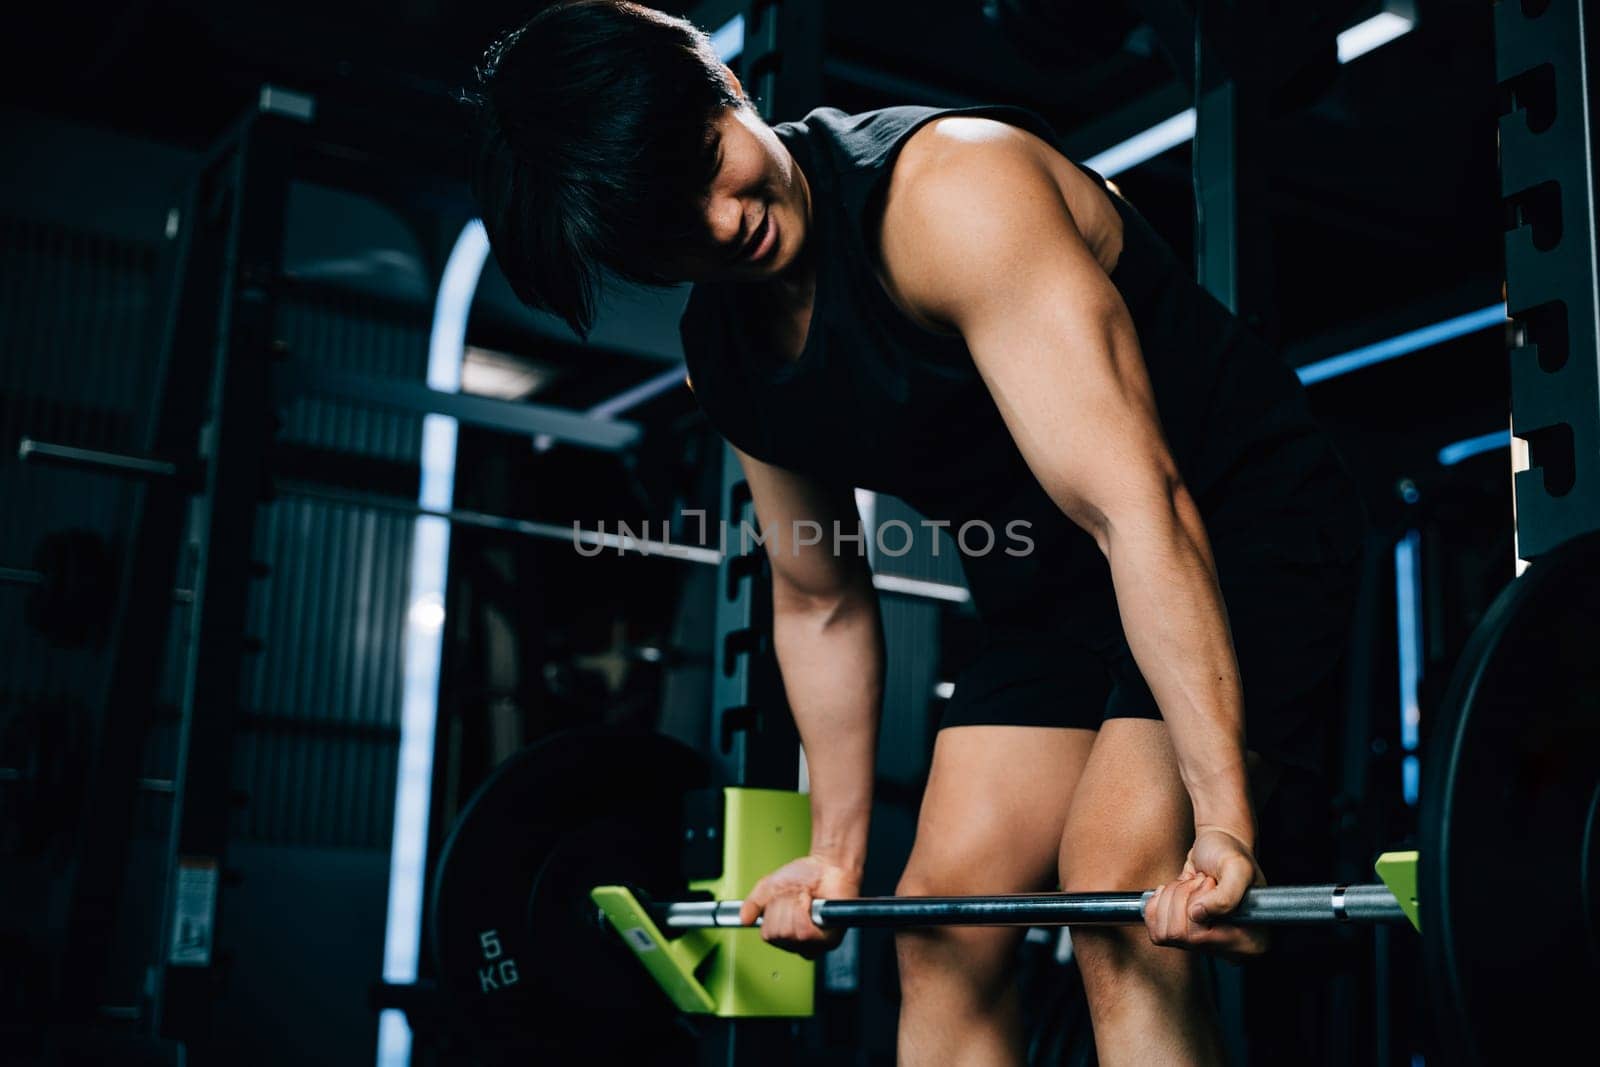 A handsome Asian man holding a barbell and lifting weights for a strength-building workout that showcases his athletic body and determination. power lifting training concept